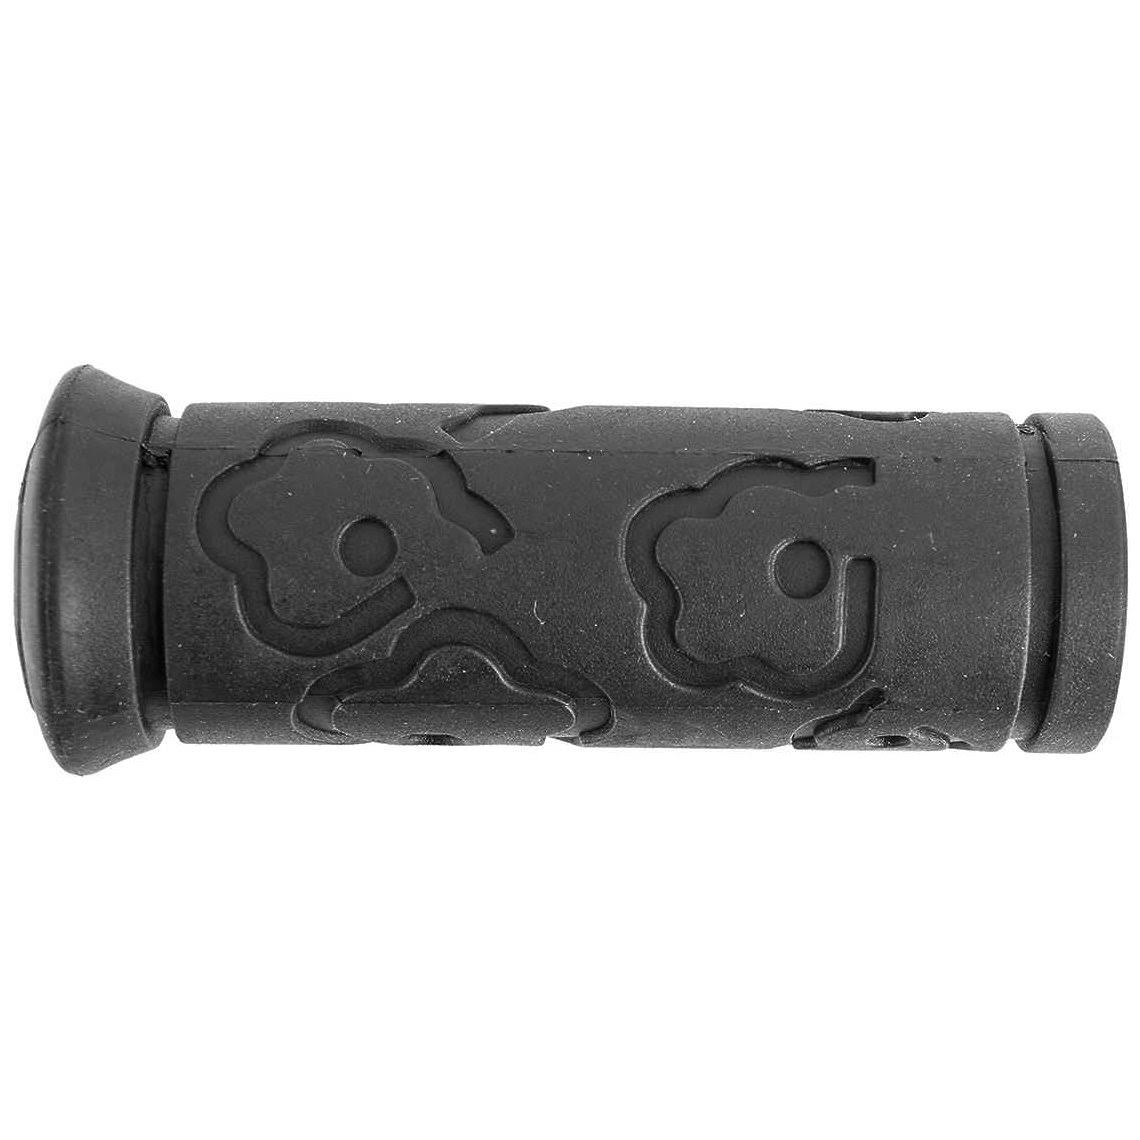 SRAM Replacement Stationary Grip - 90mm, Black